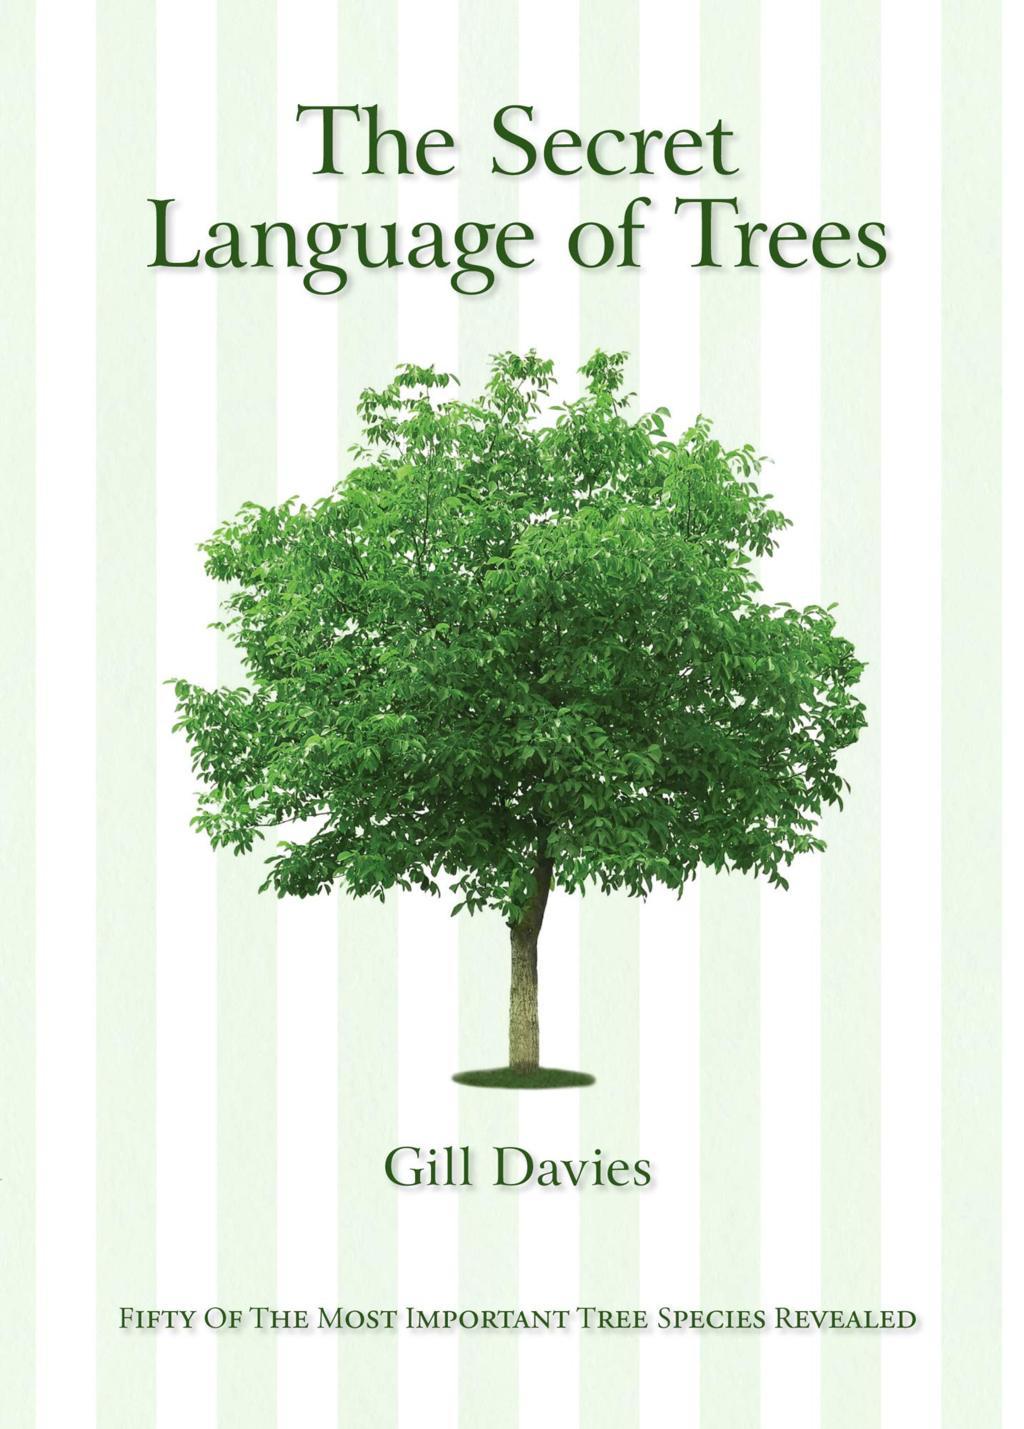 importance of trees a reference book